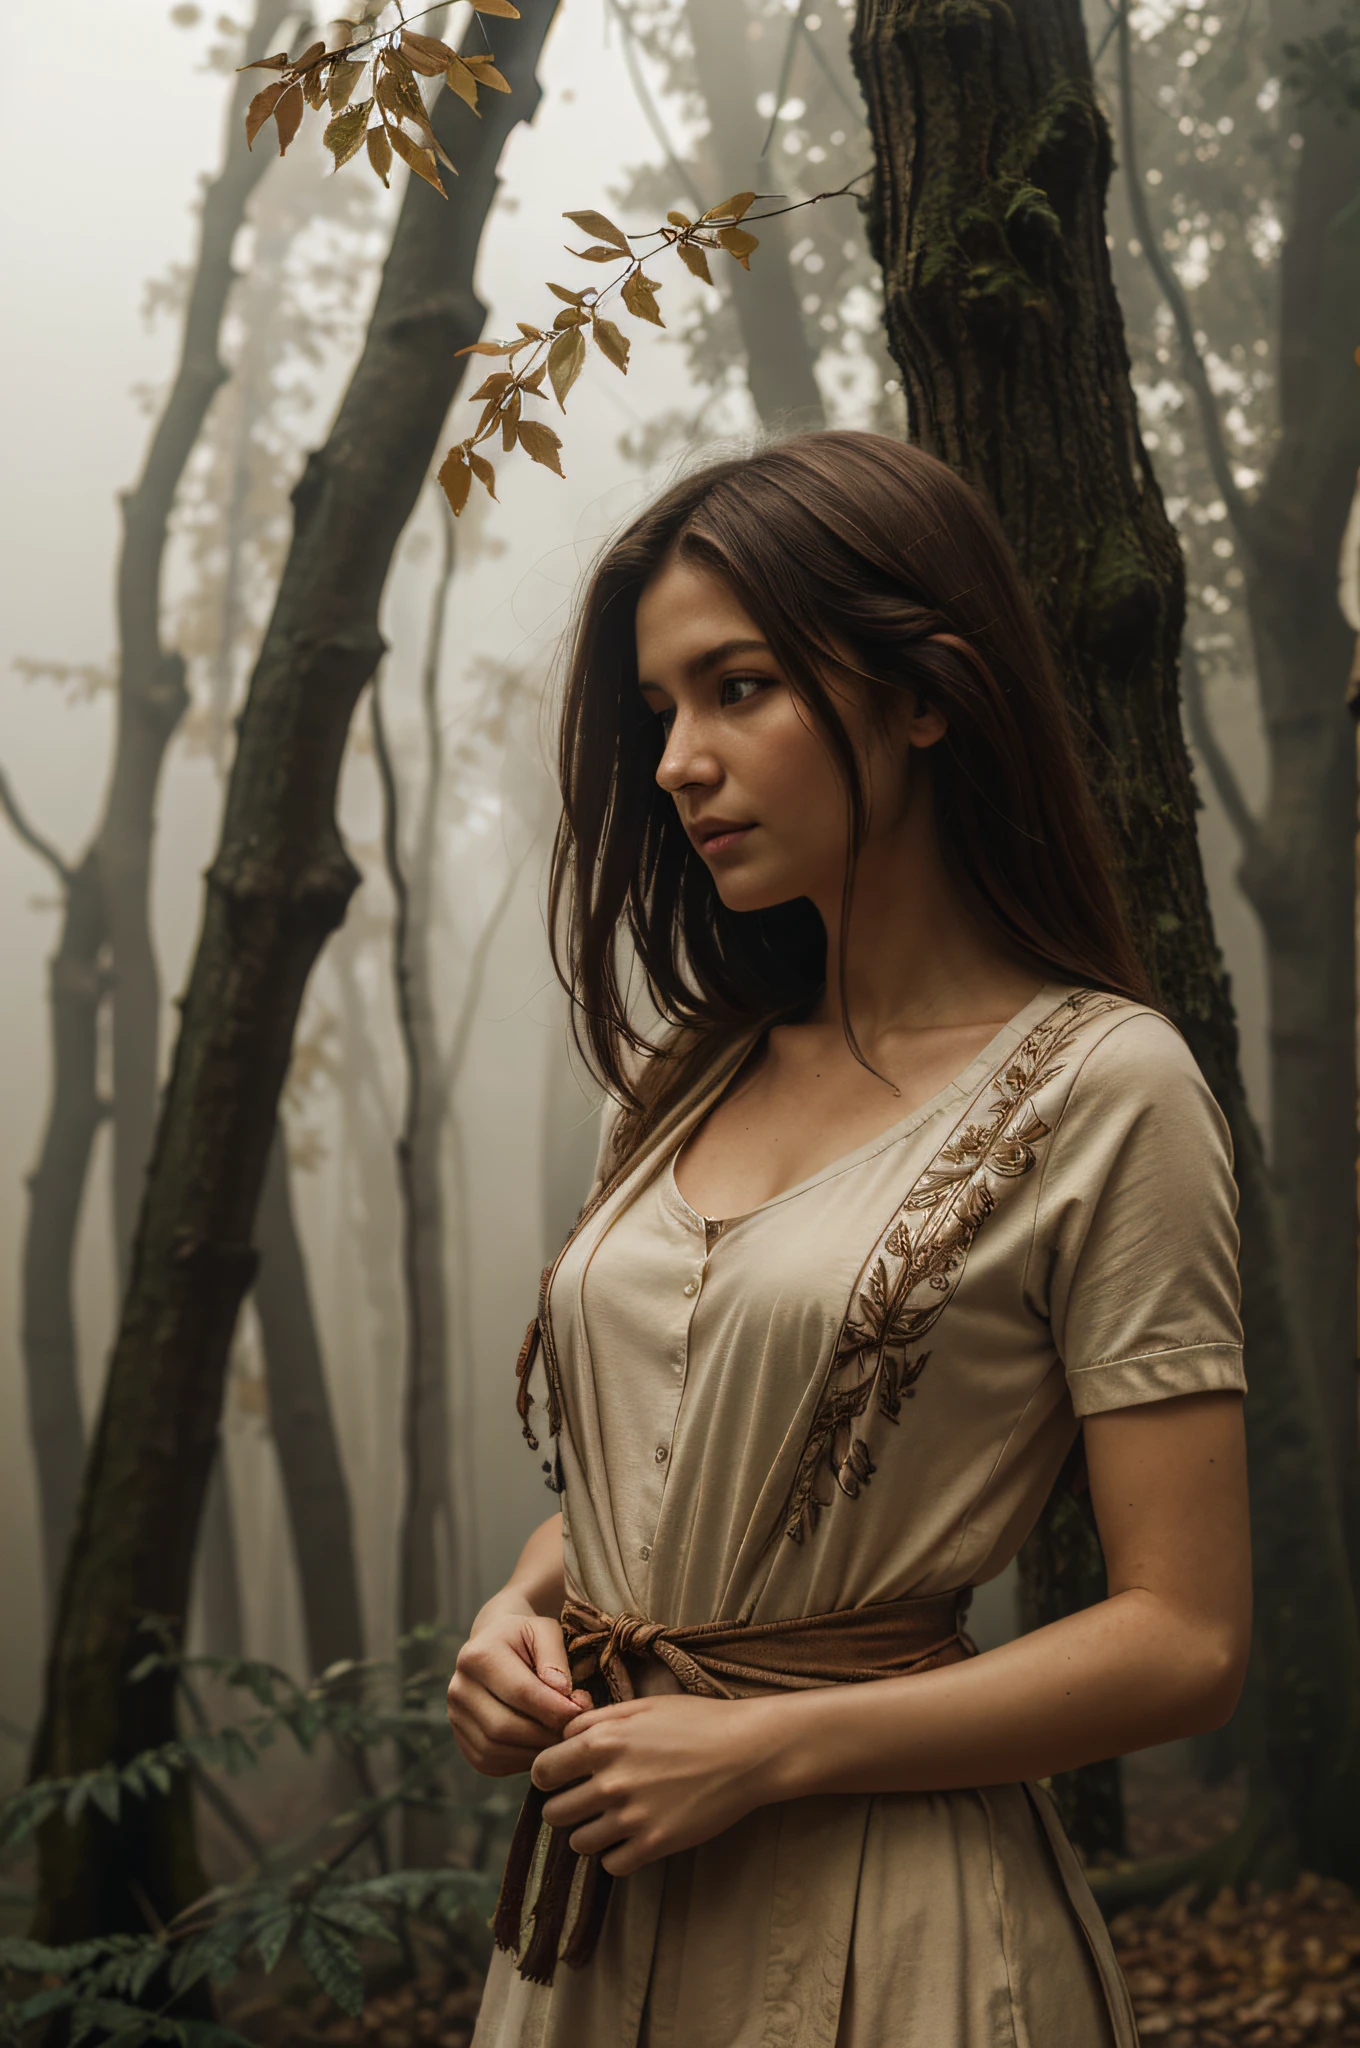 woman made of wood. Her arms like branches full of leaves. The fog envelops the woman. Soft light and very high resolution. Numerous intricate details.